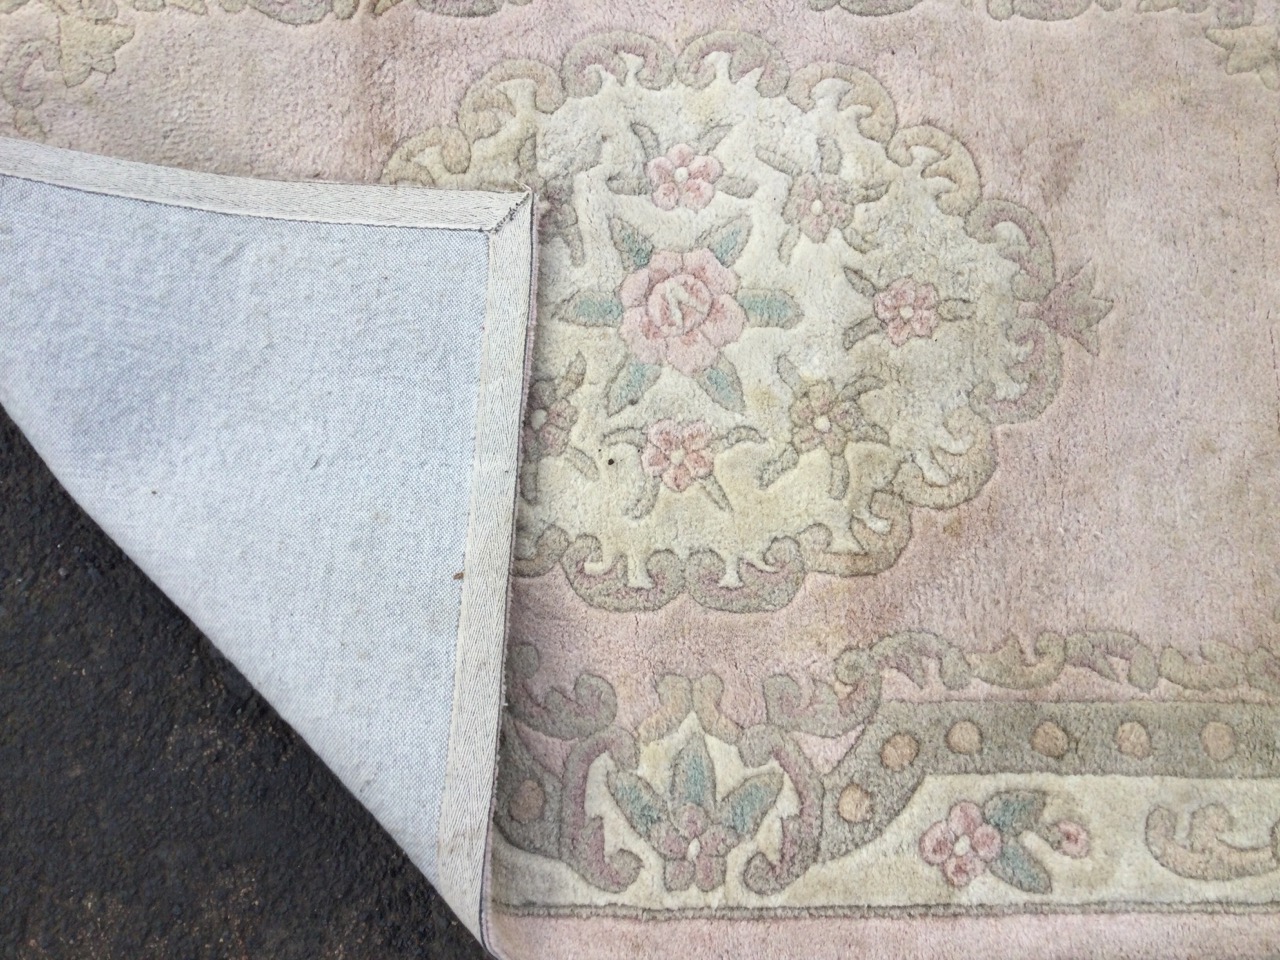 A Chinese wool rug woven in pastel floral shades with central circular medallion on pink field - Image 2 of 3